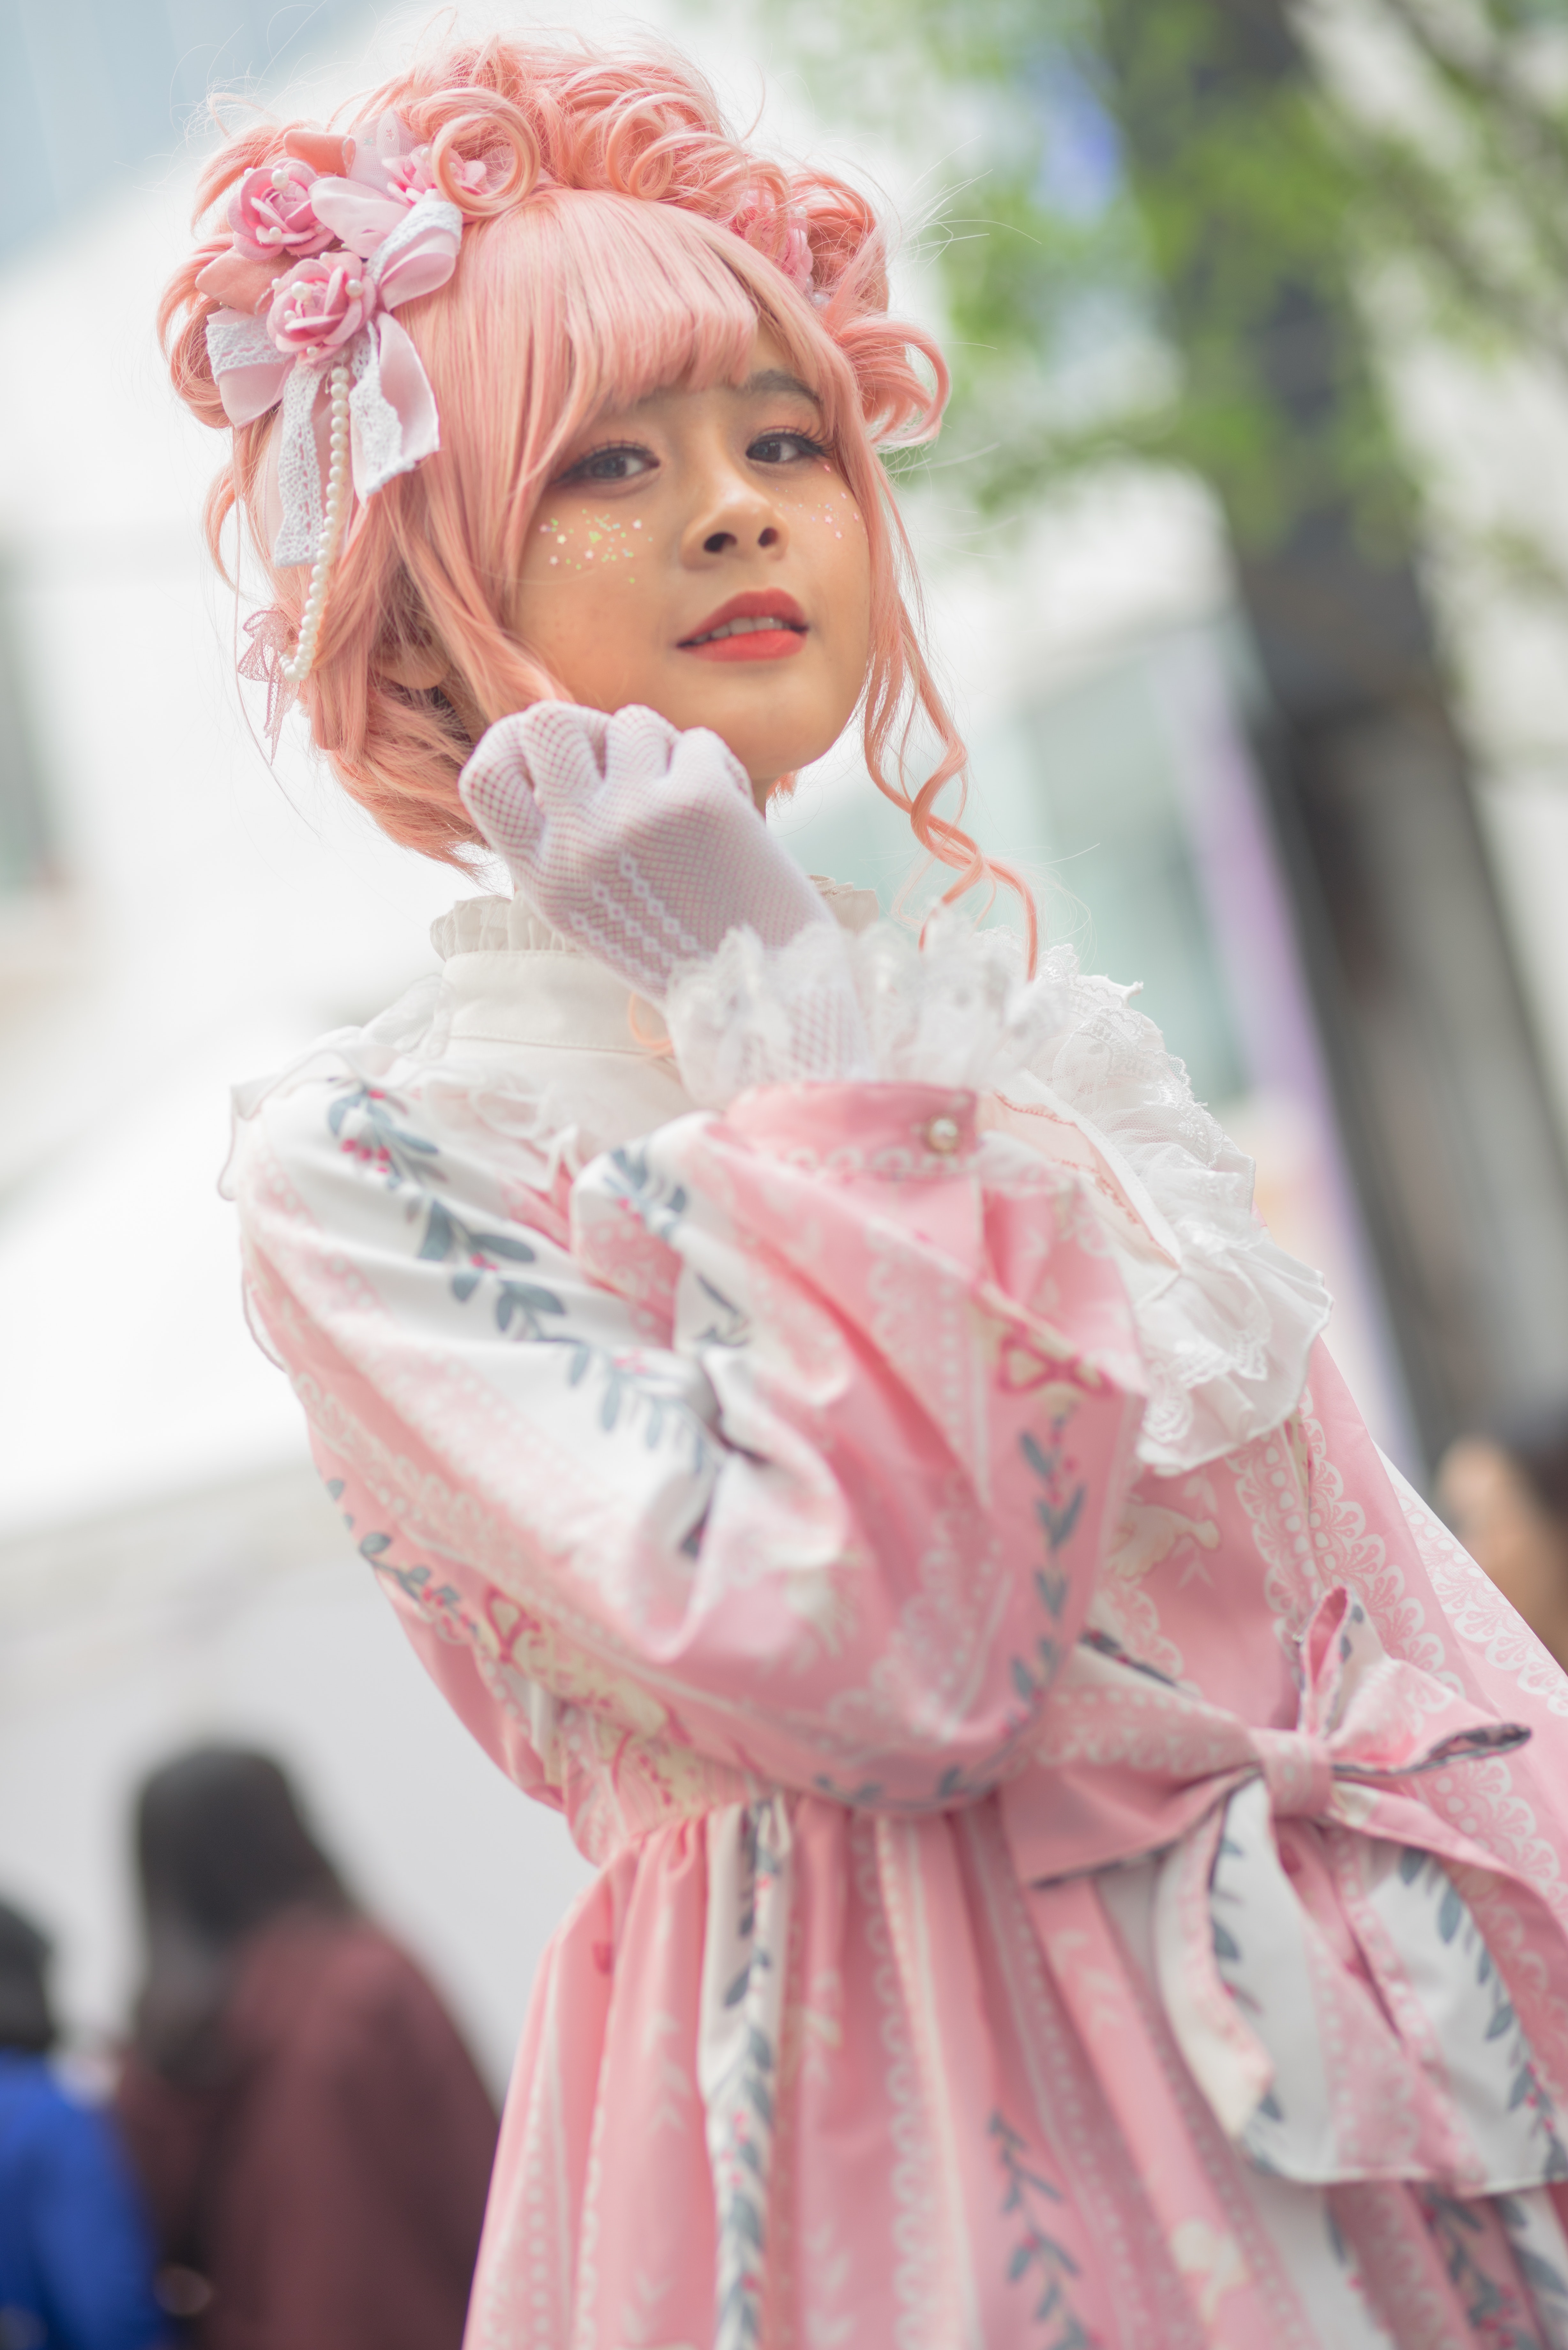 A Japenese girl with pink hair wearing a pink dress.